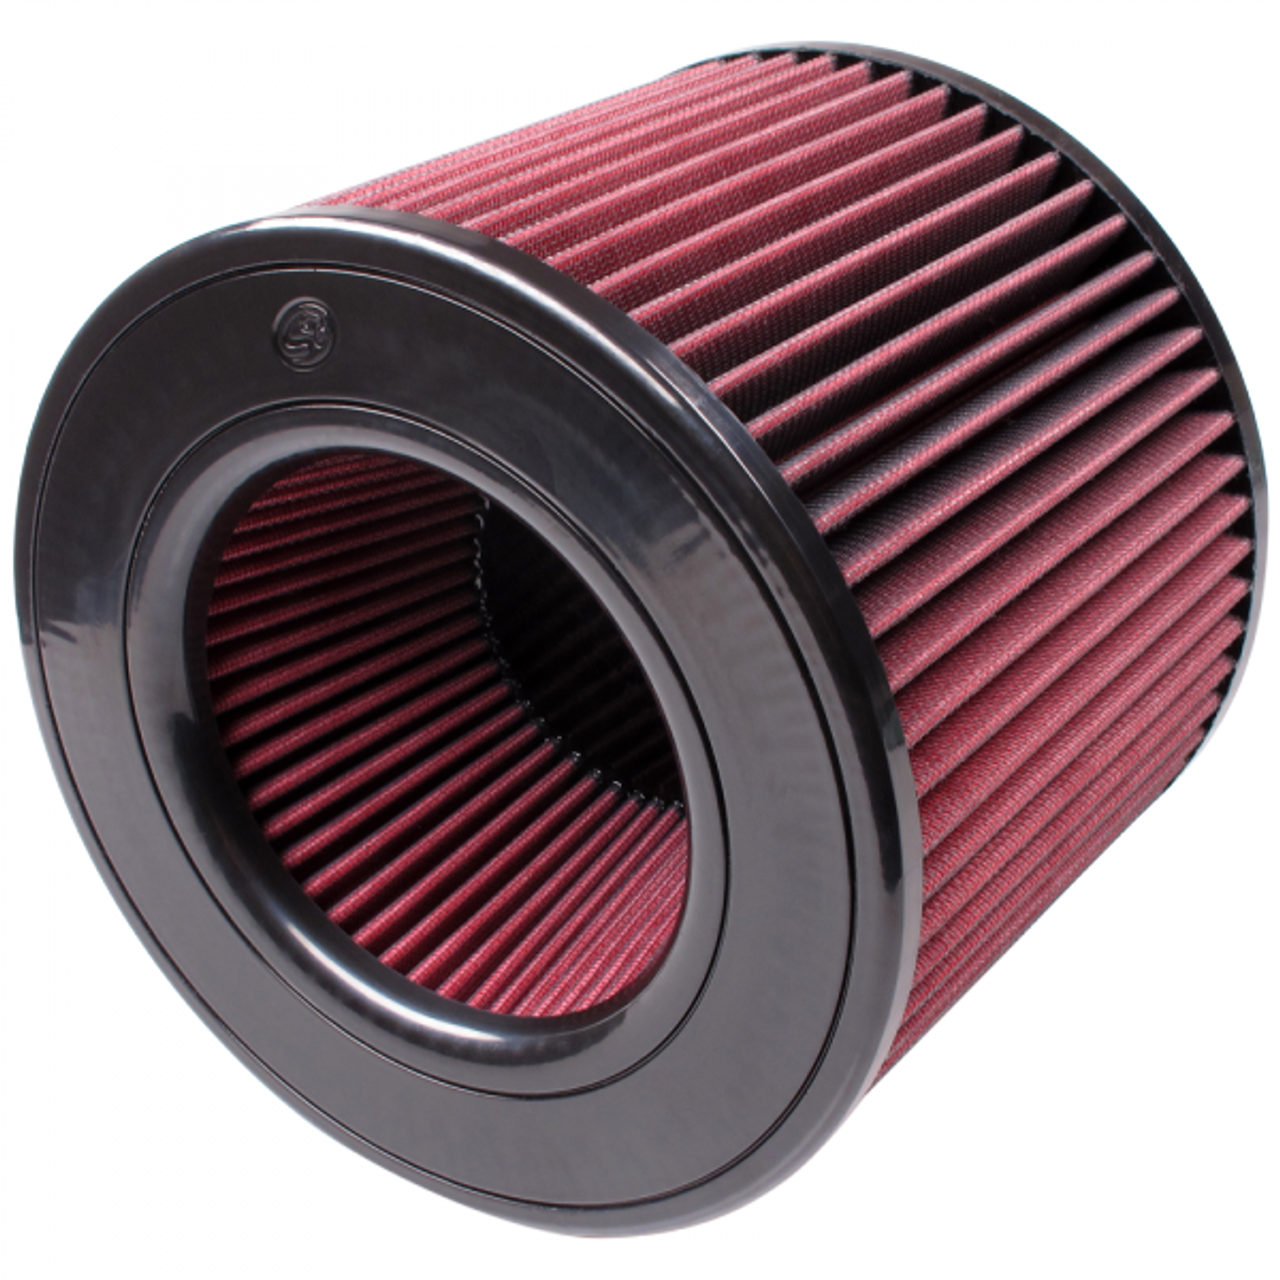 Air Filters for Competitors Intakes AFE XX-91046